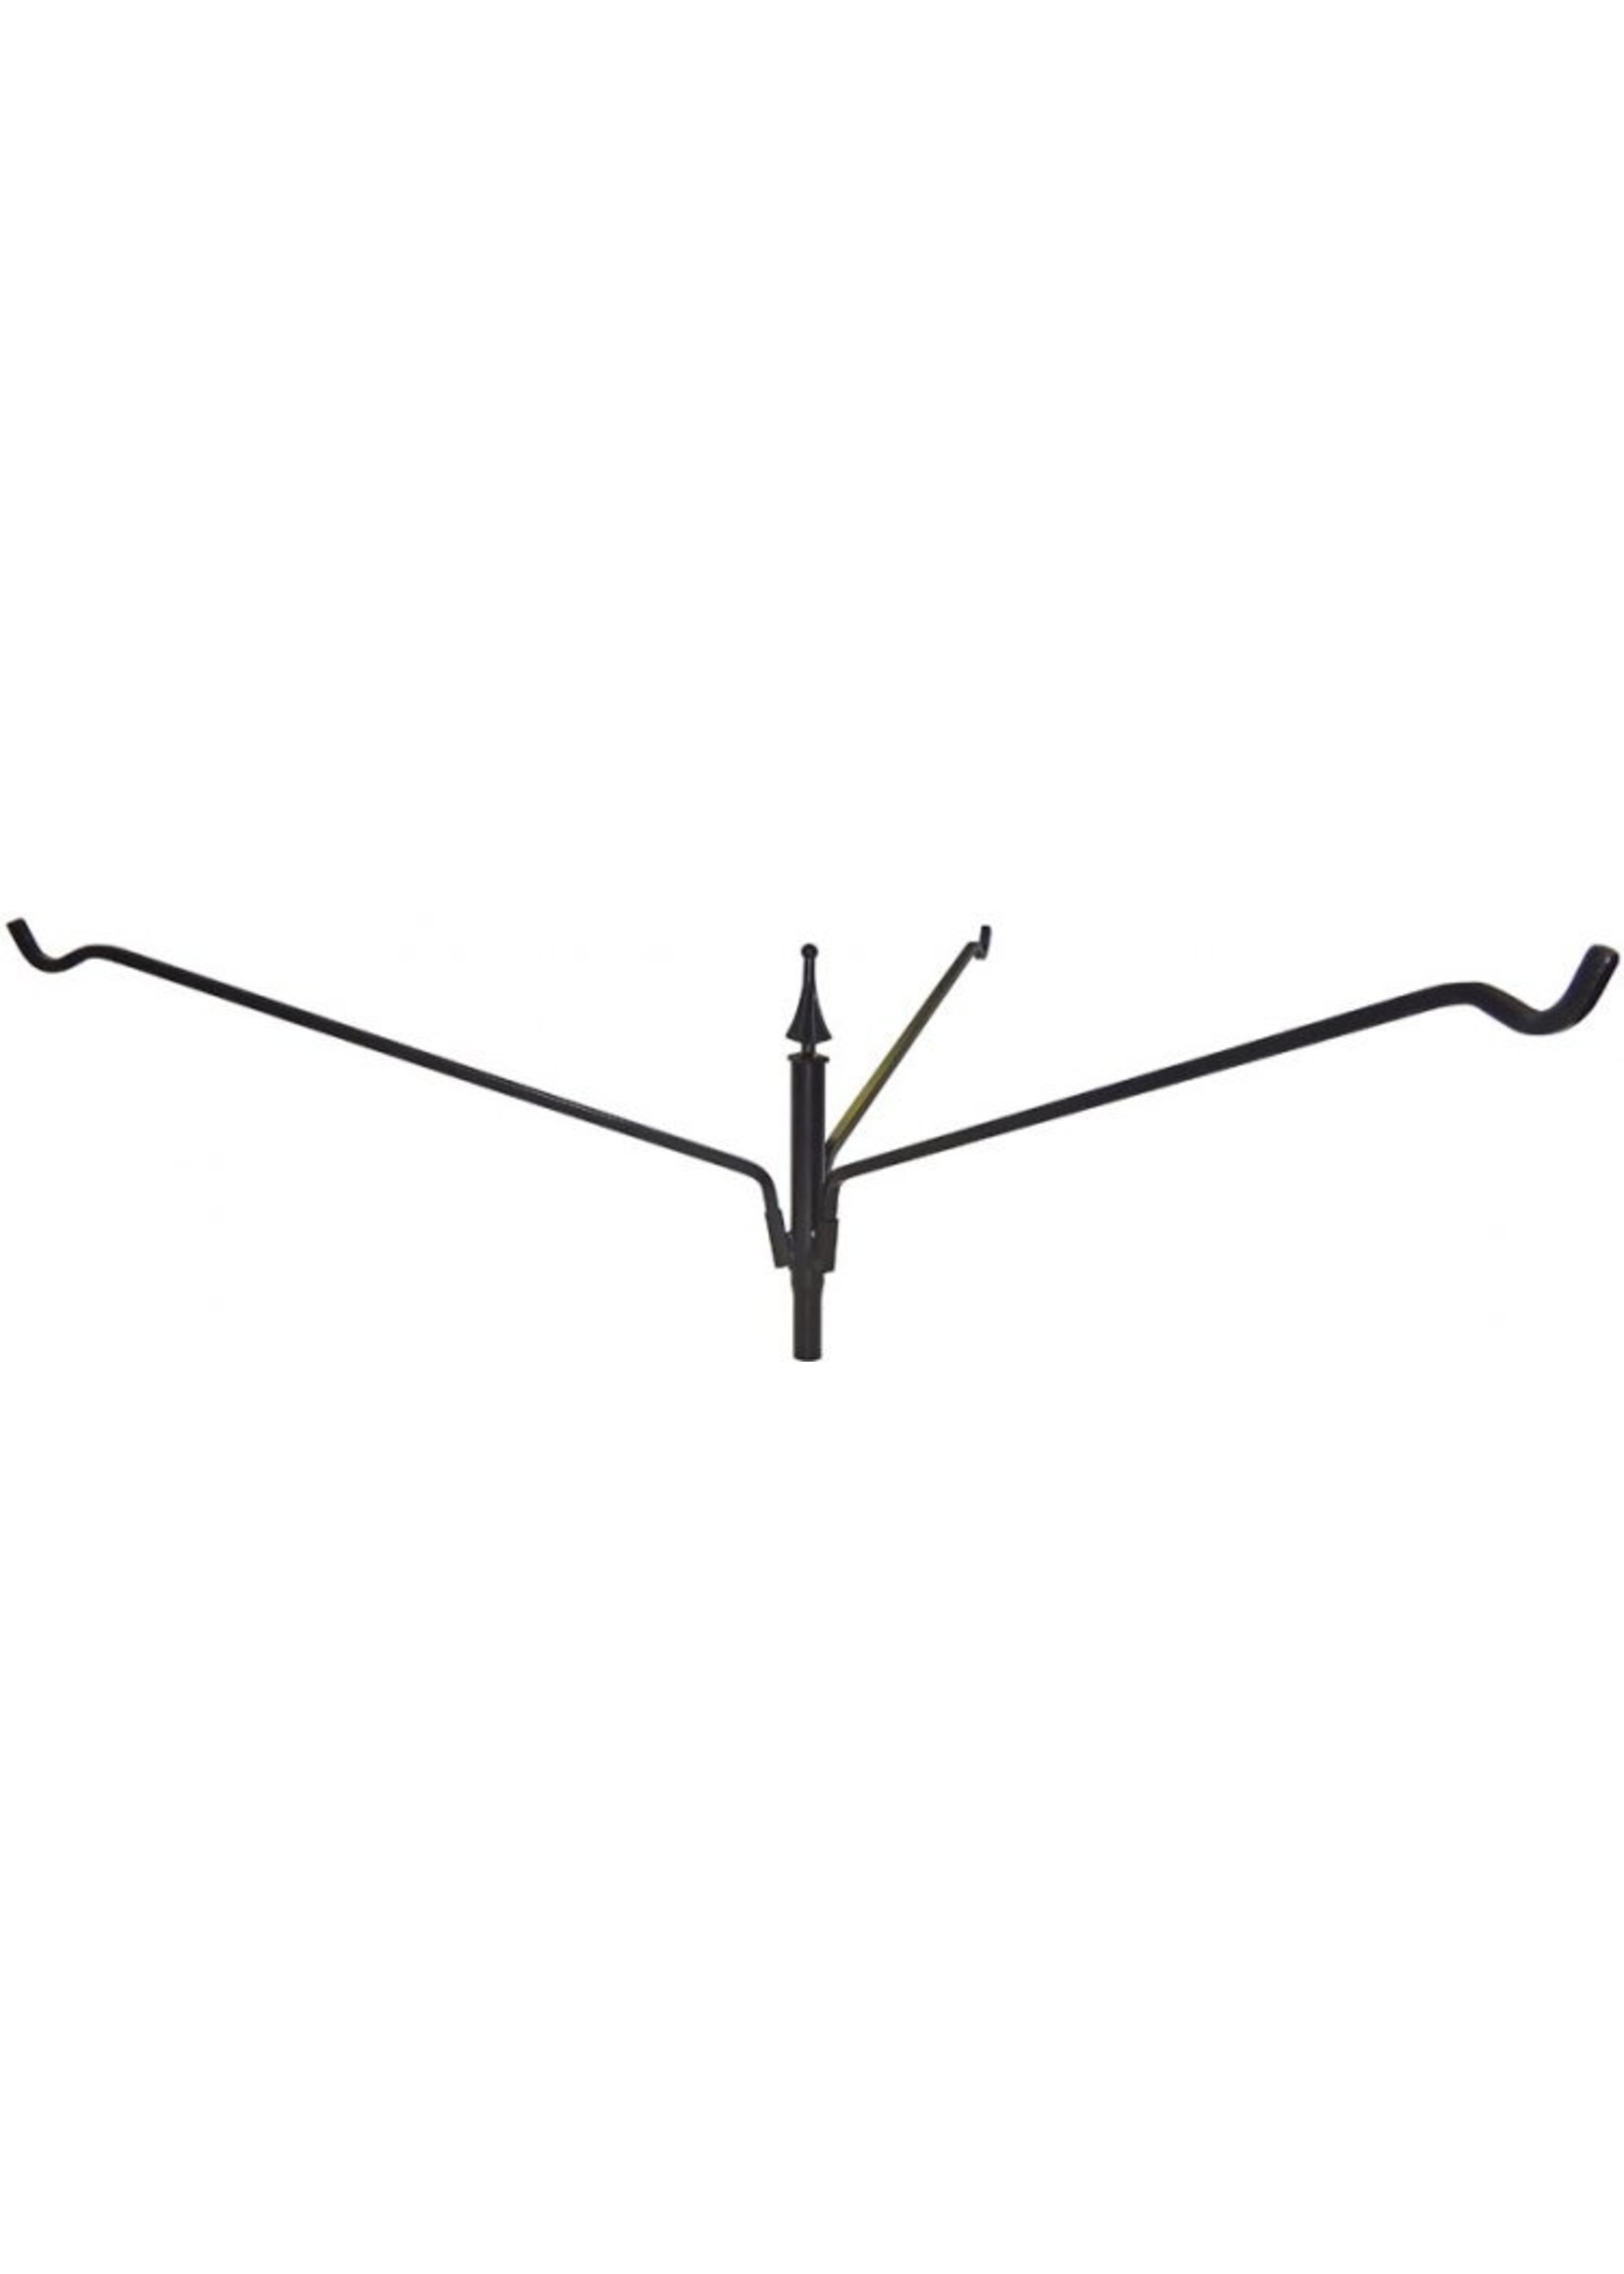 ERVA Extended Reach 3 Arm Pole System (Top Only)